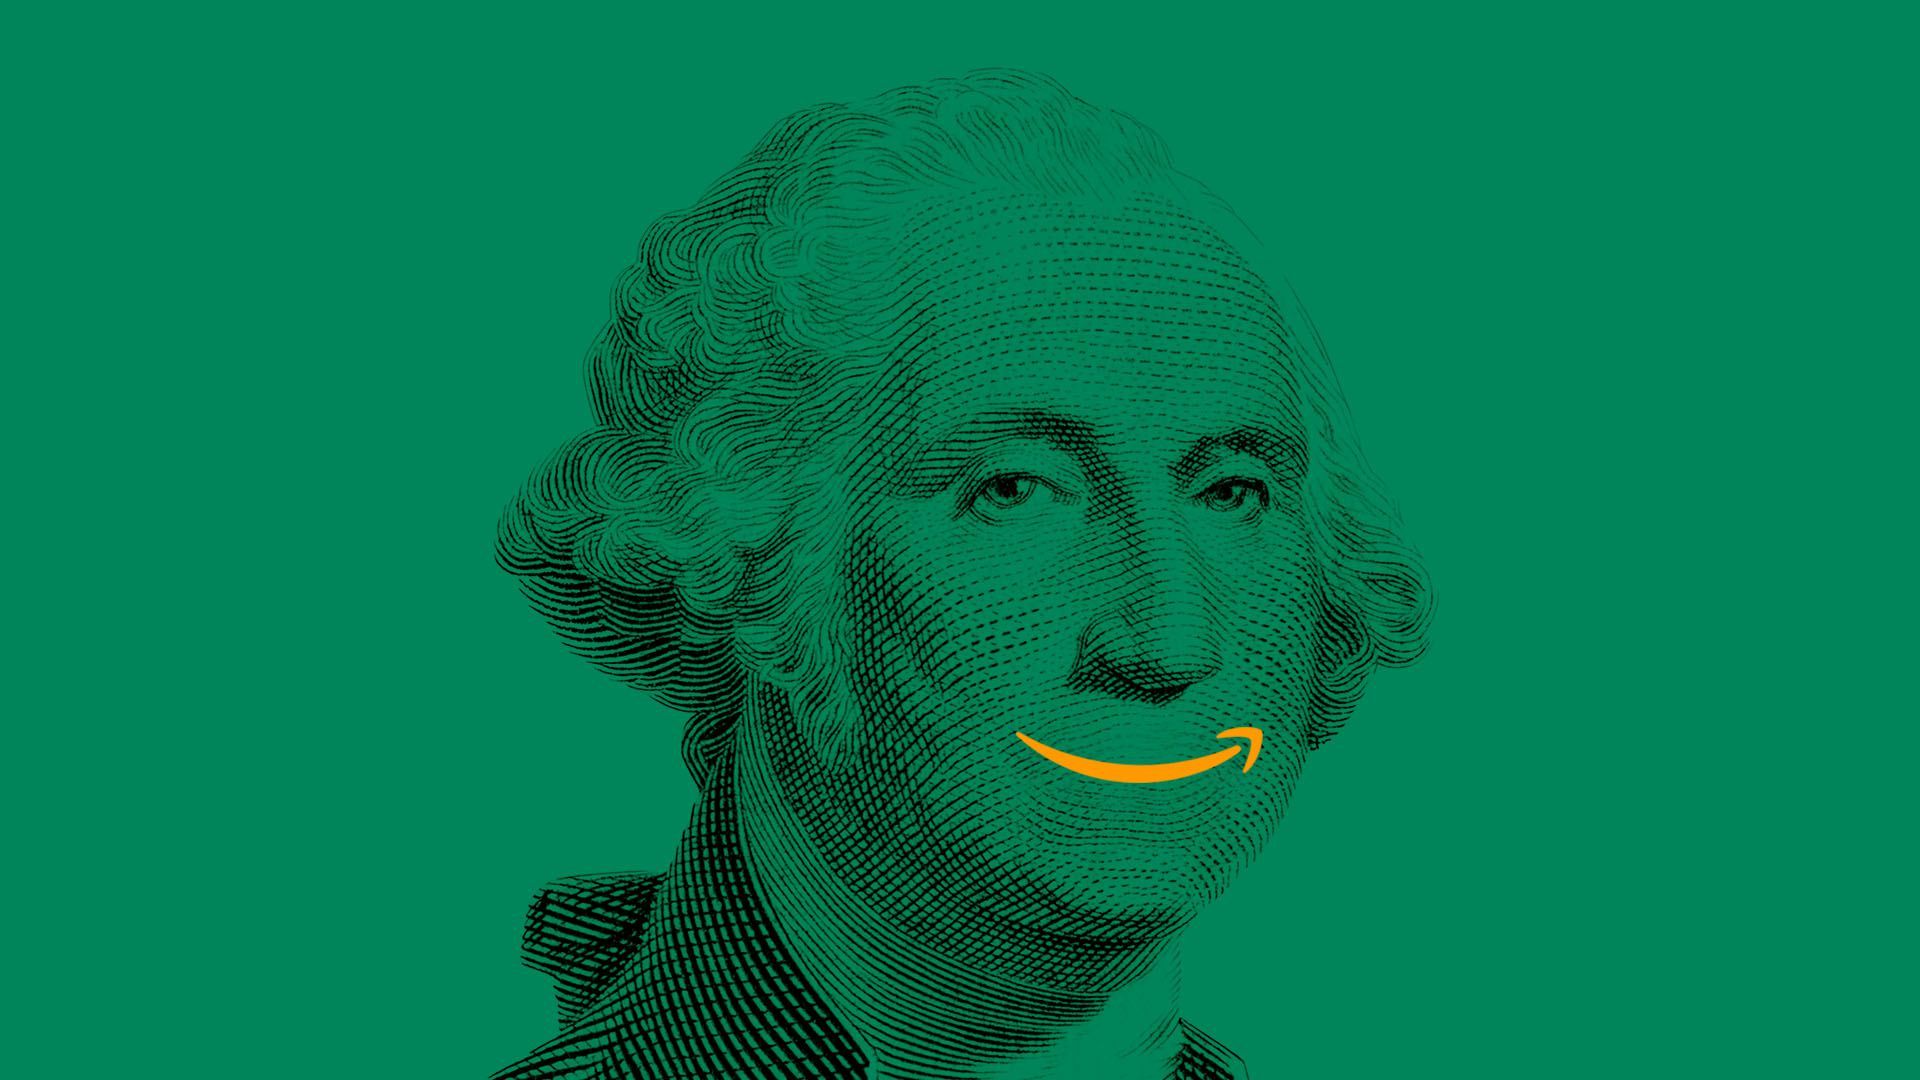 An illustration of George Washington with an Amazon smile logo as his mouth.